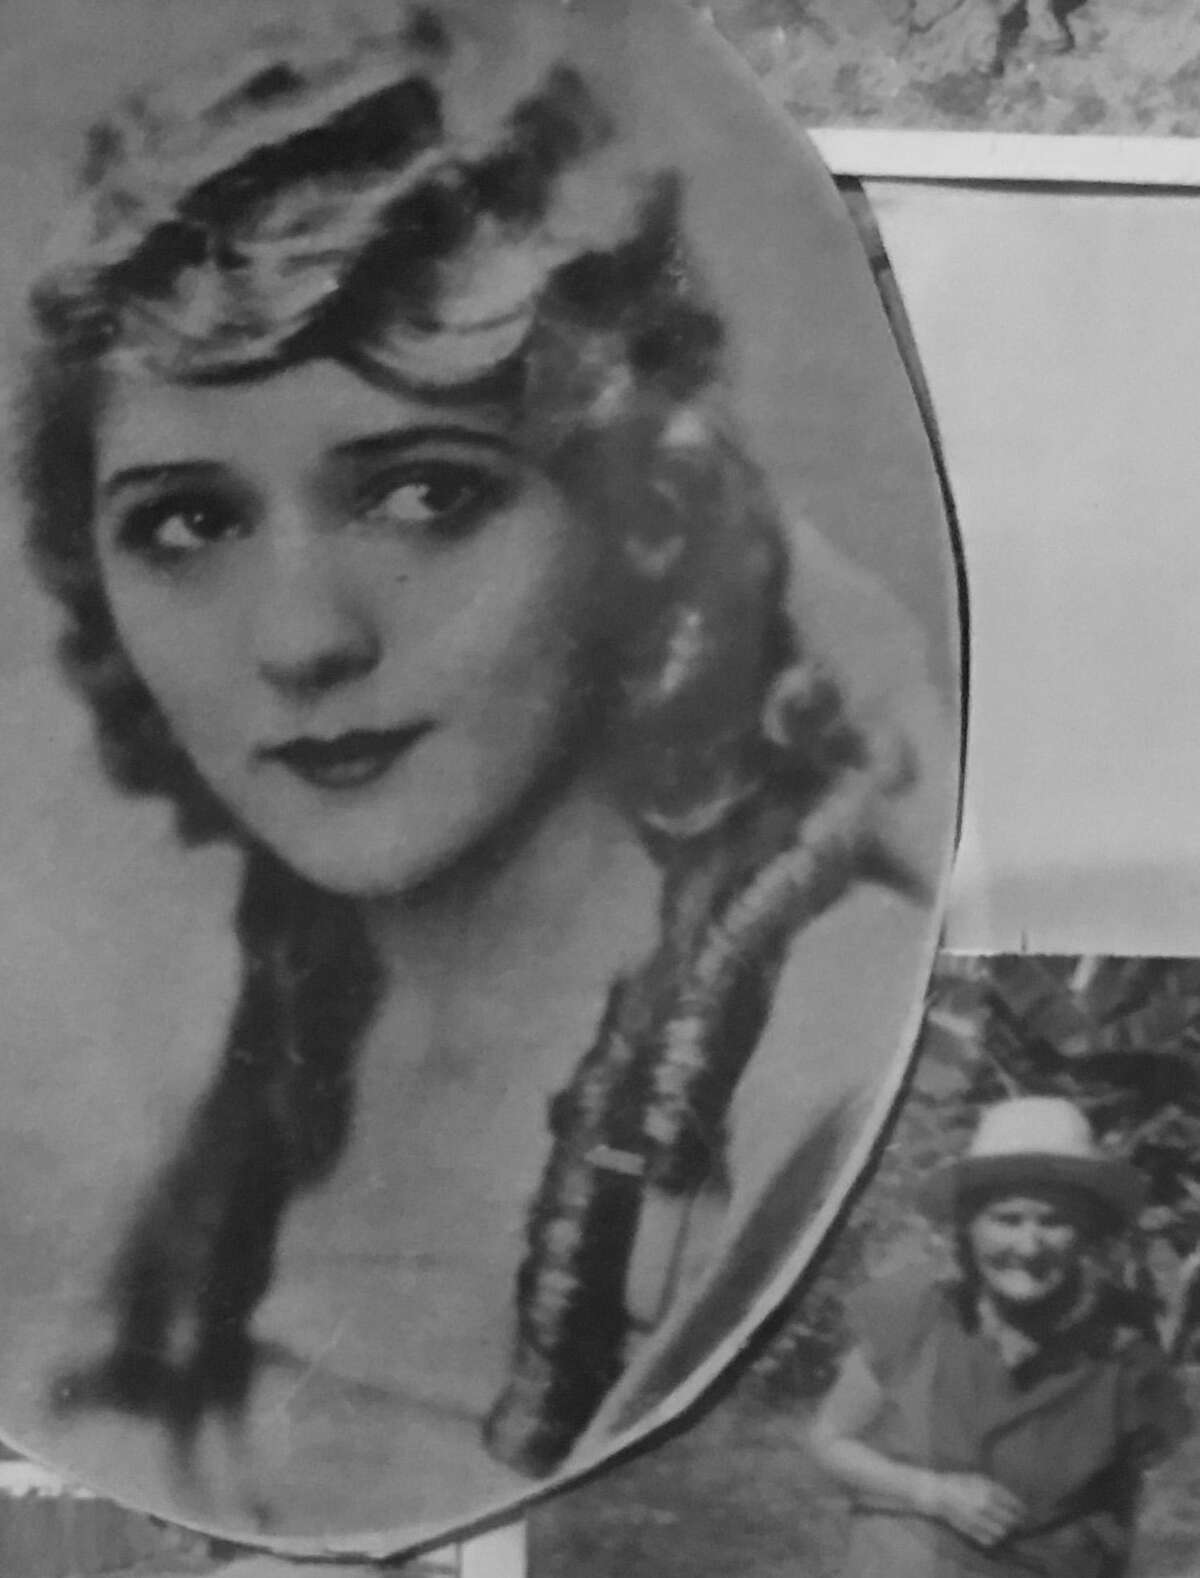 Trapeze artist Pansy Carpenter of McCamey may have tried to make it in Hollywood, a distant relative says.